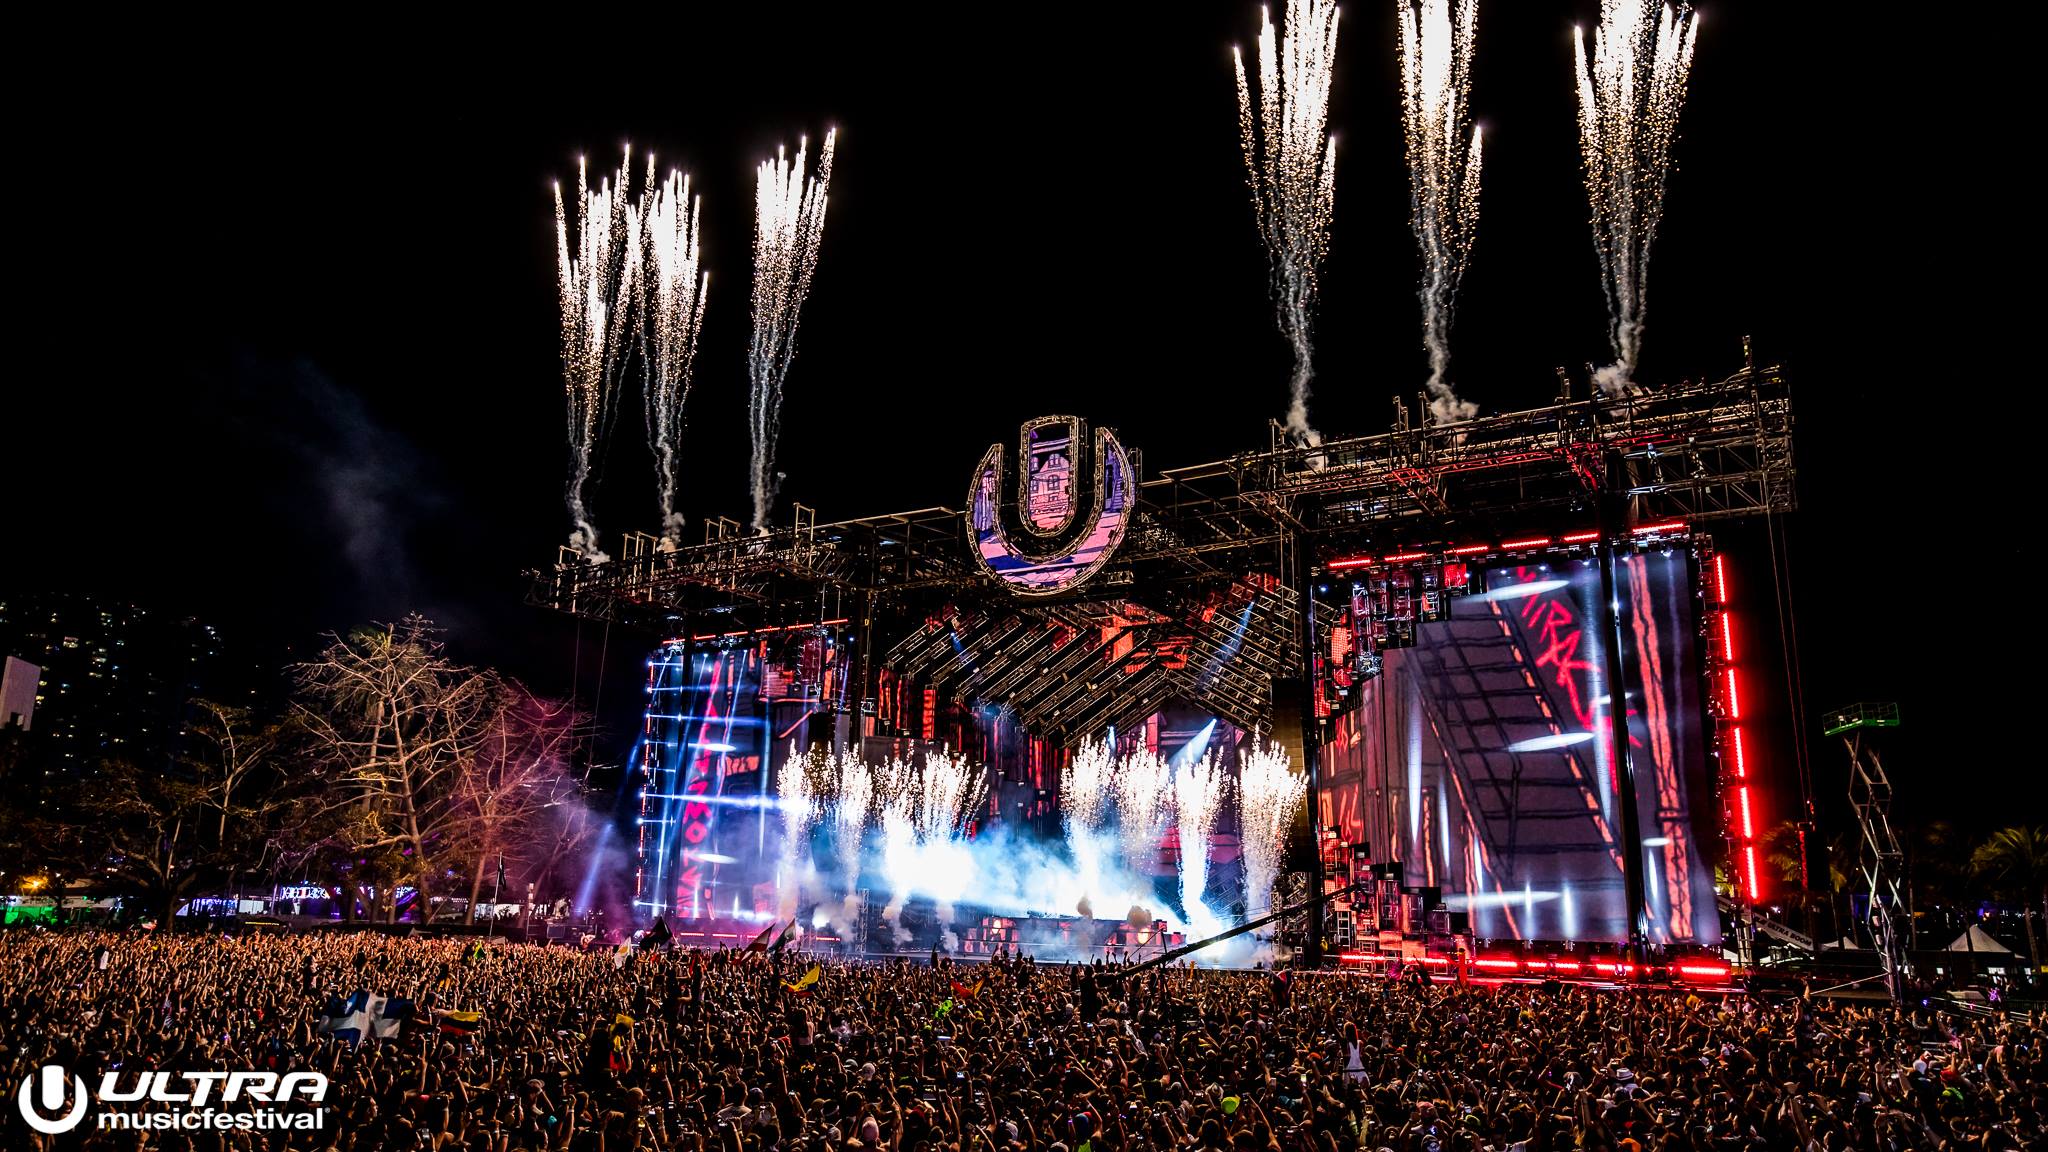 2018 Ultra Music Festival Brings Edm Heavyweights To A Jaw Dropping